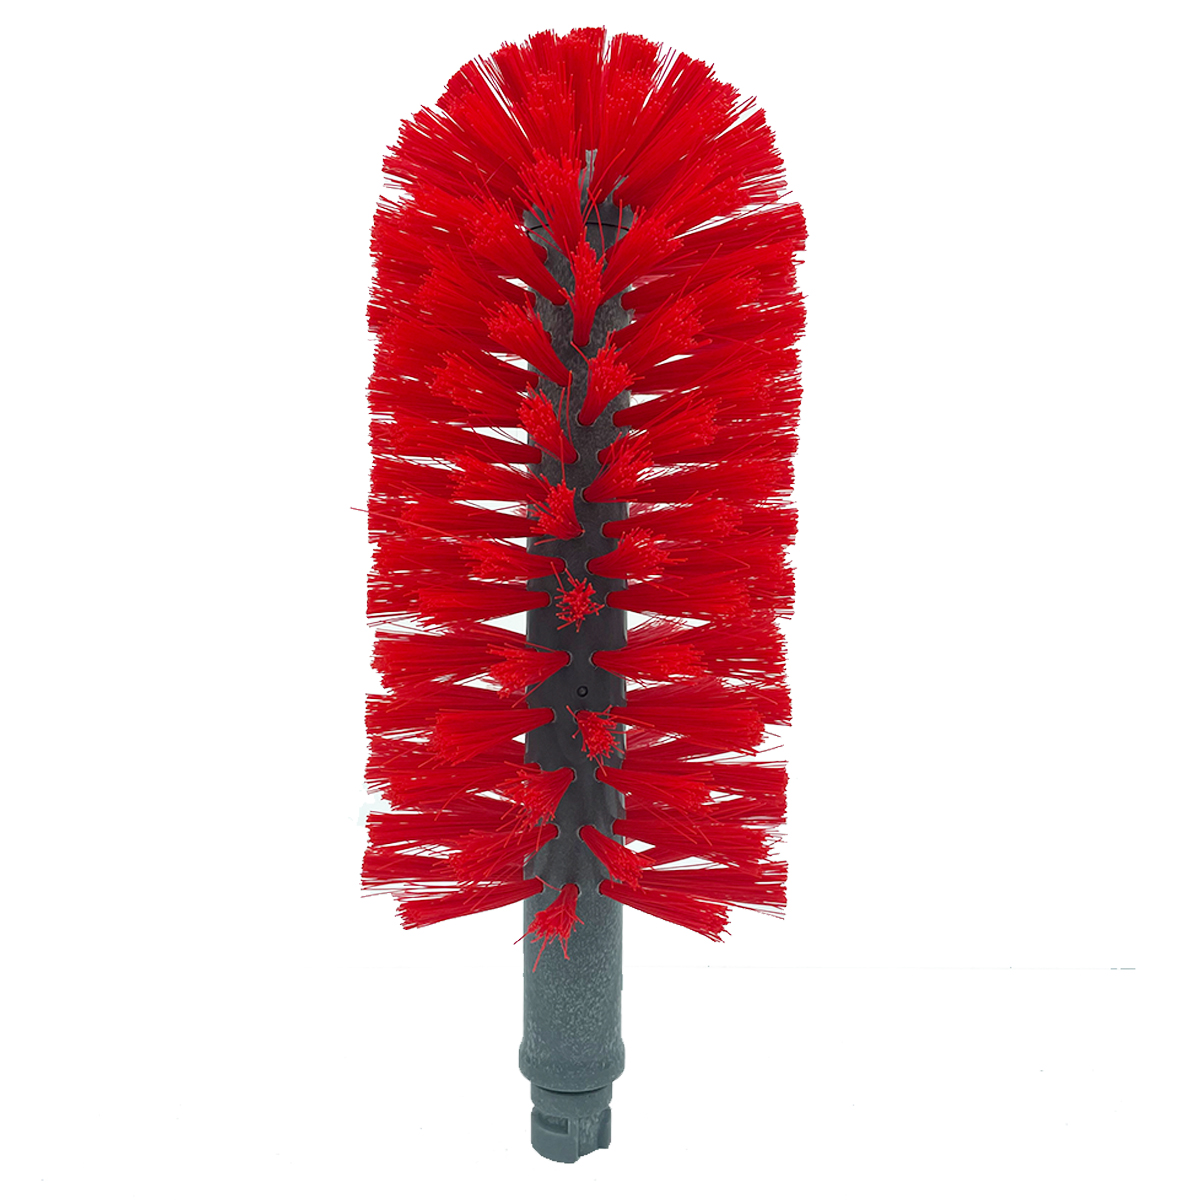 Spulboy Replacement Centre Wine Brush - CKP6552